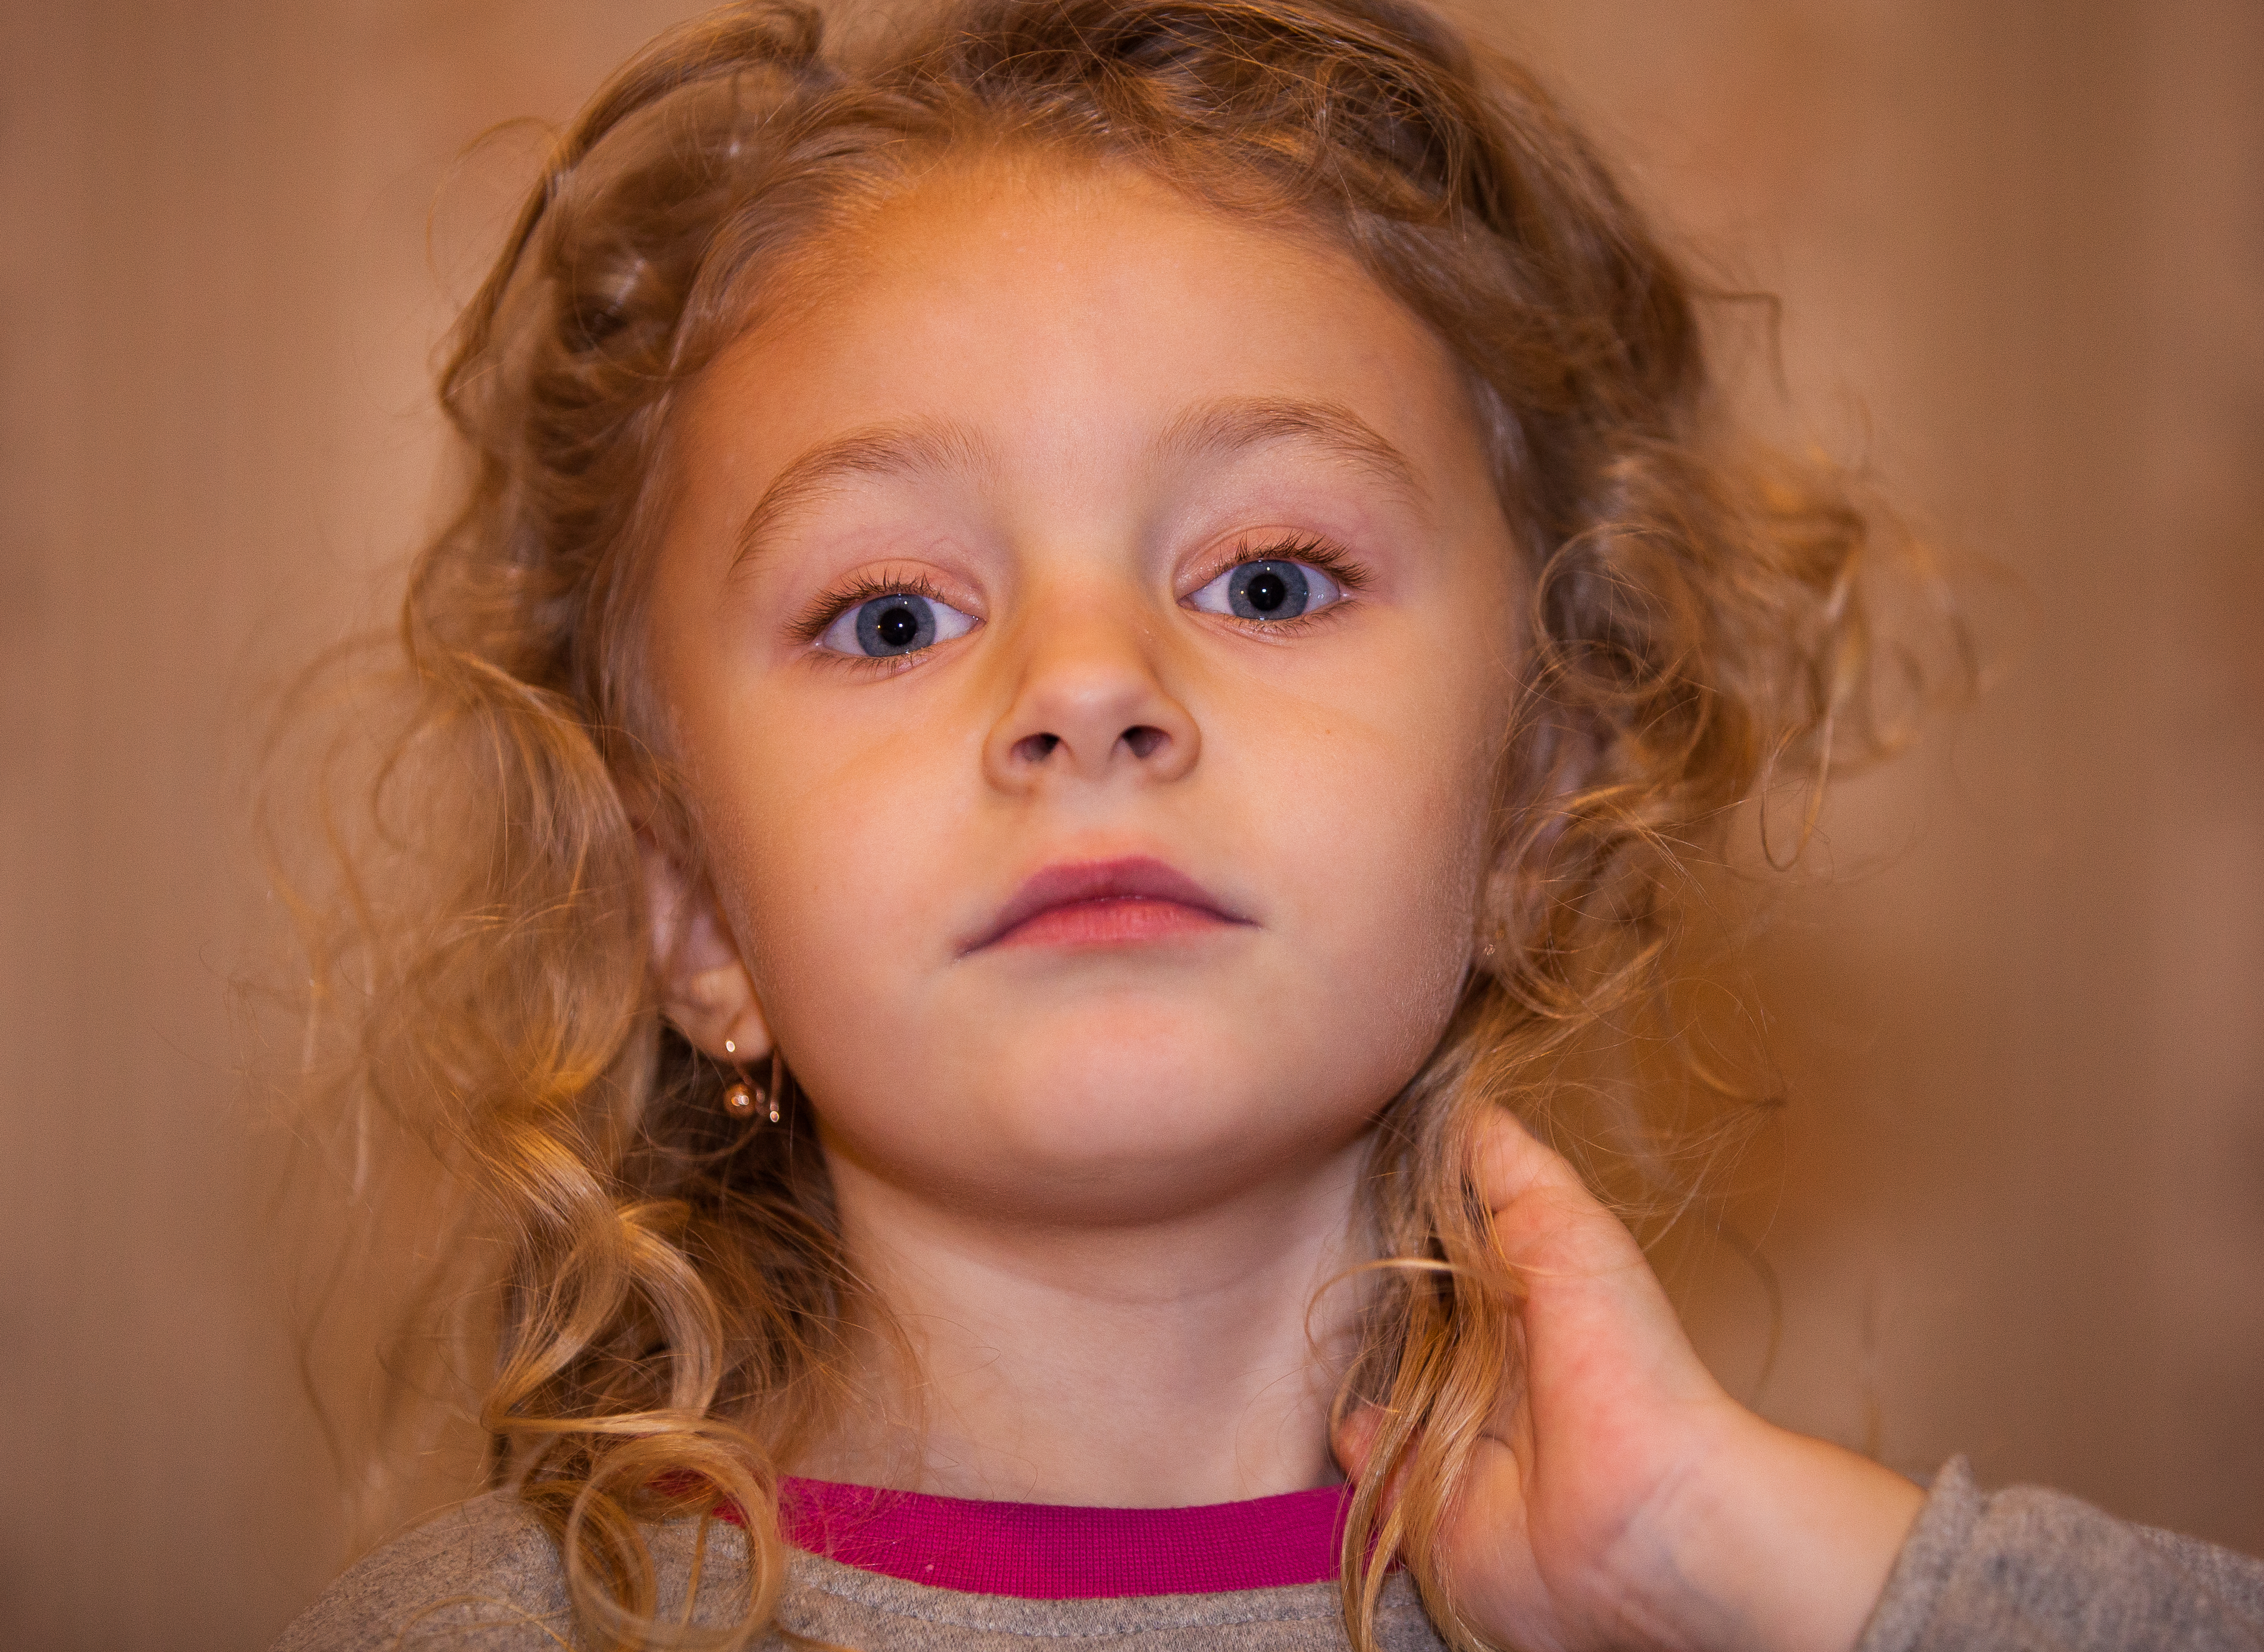 a cute blond child girl photographed in January 2014, photo 3 out of 4